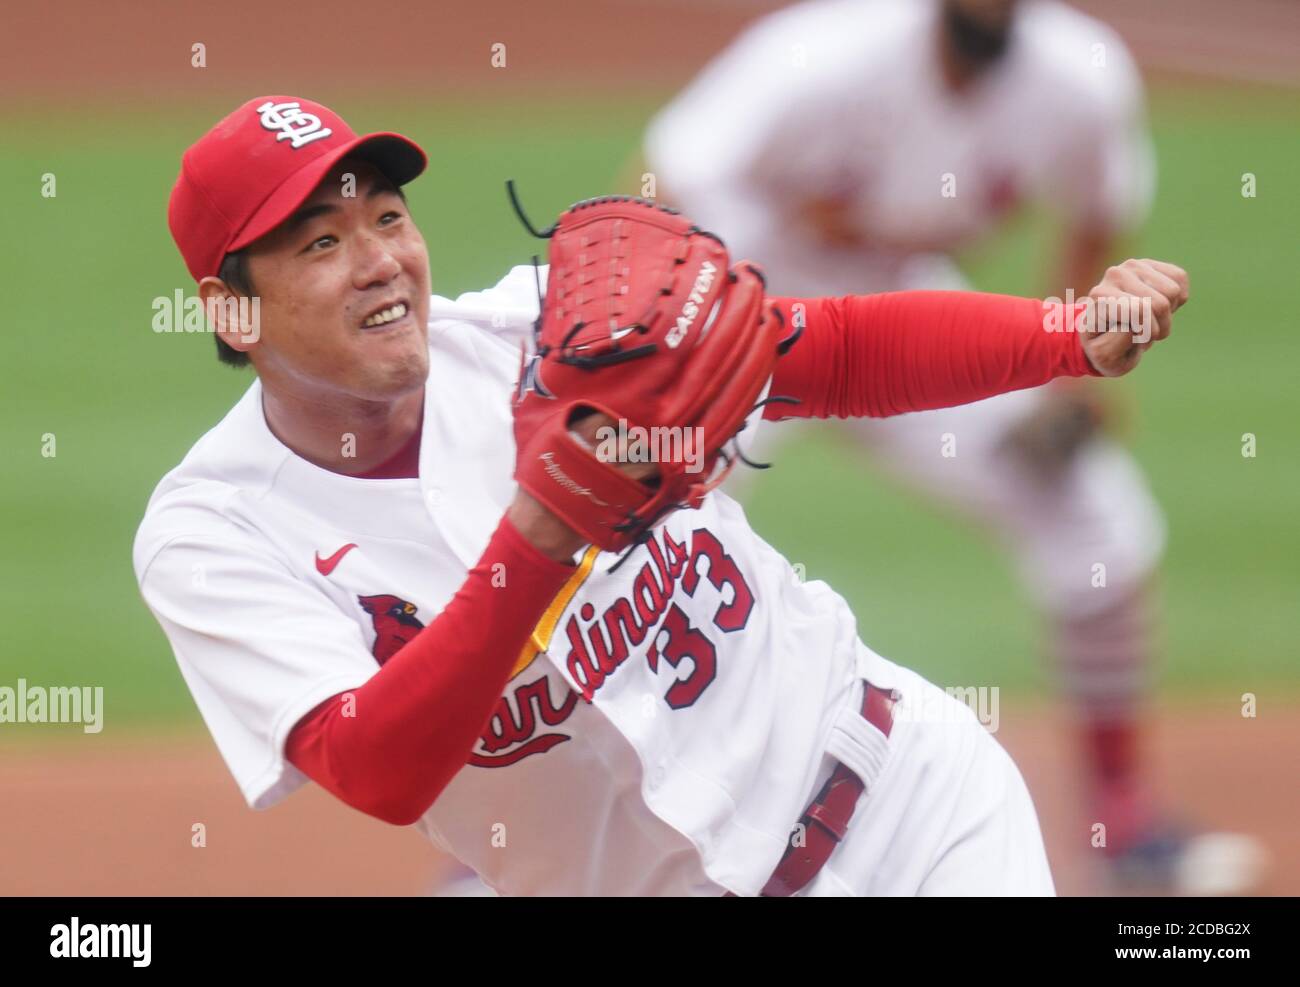 St. Louis, United States. 27th Aug, 2020. St. Louis Cardinals starting pitcher Kwang Hyun Kim watches the flight of the ball off the bat of Pittsburgh Pirates Jacob Stallings in the second inning at Busch Stadium in St. Louis on Thursday, August 27, 2020. Photo by Bill Greenblatt/UPI Credit: UPI/Alamy Live News Stock Photo